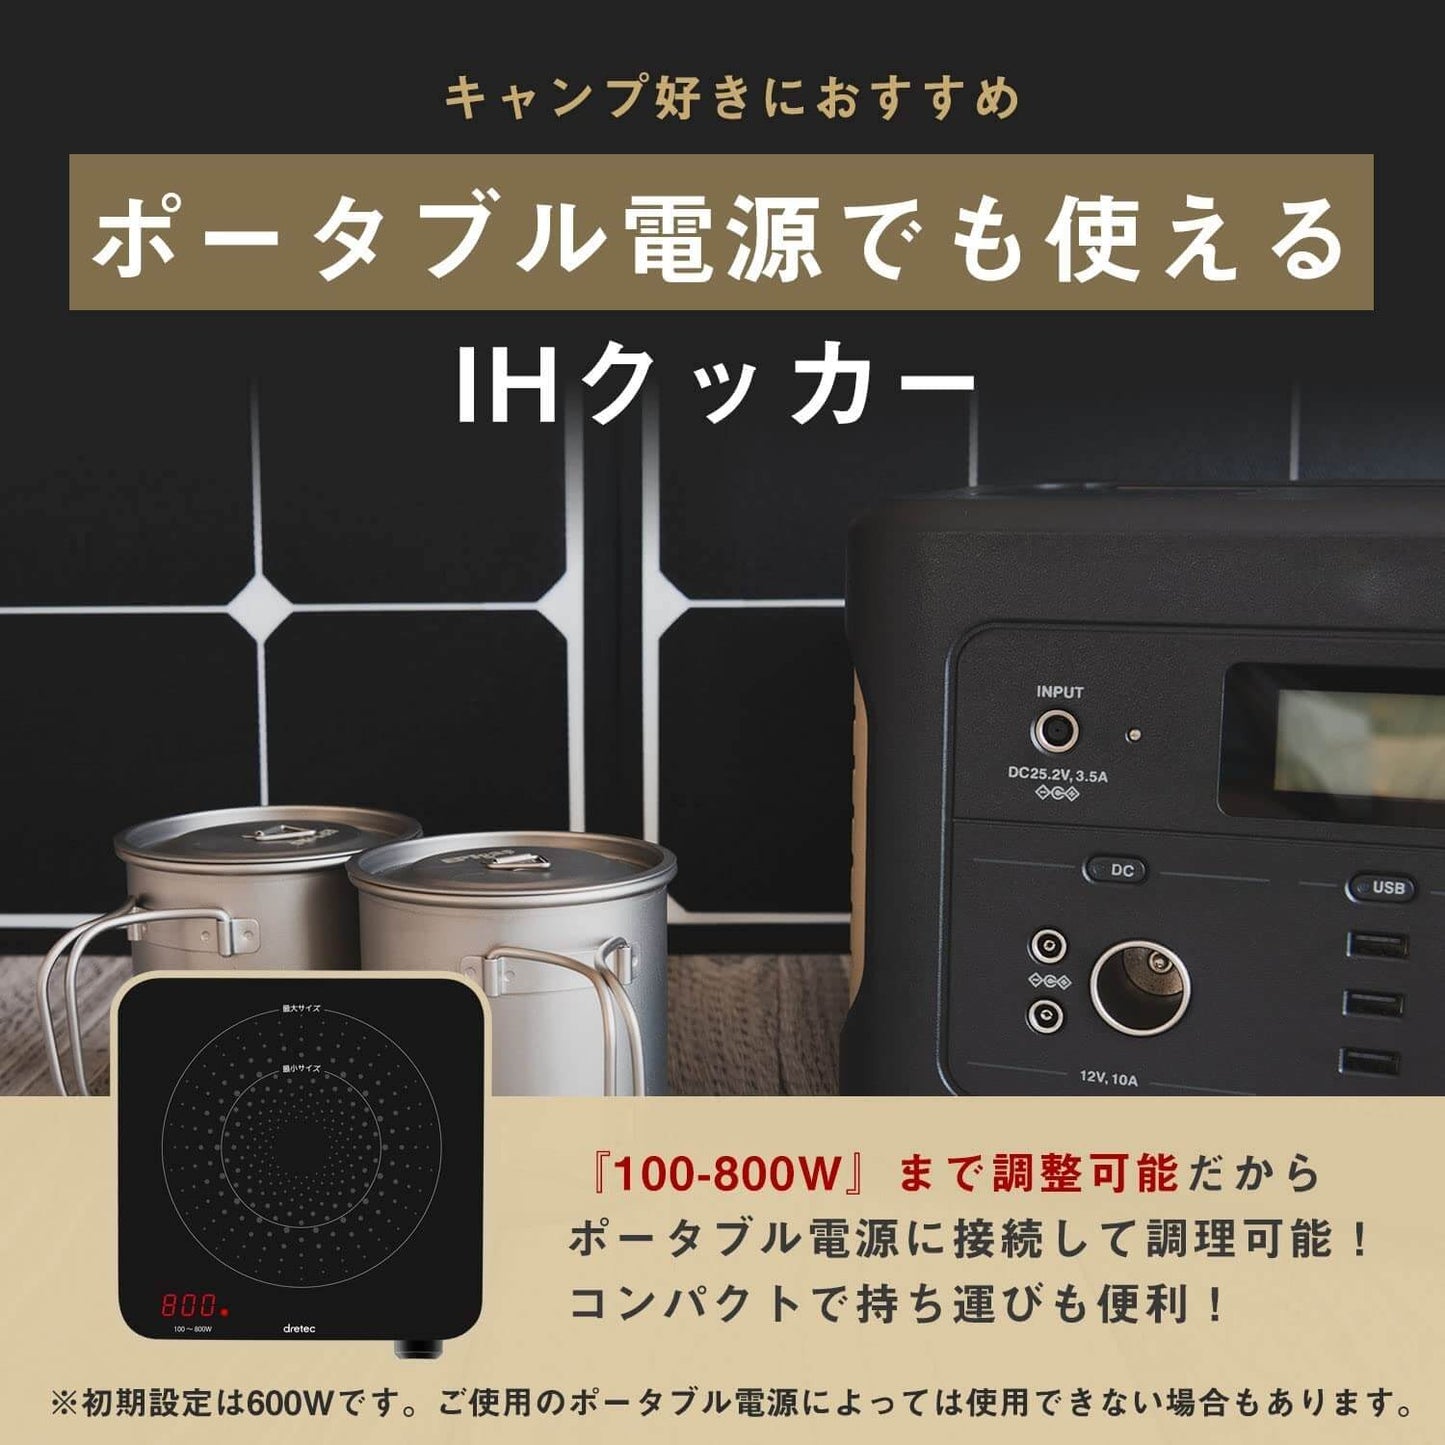 IH Cooking Heater DI-2 - imy Shop Japan